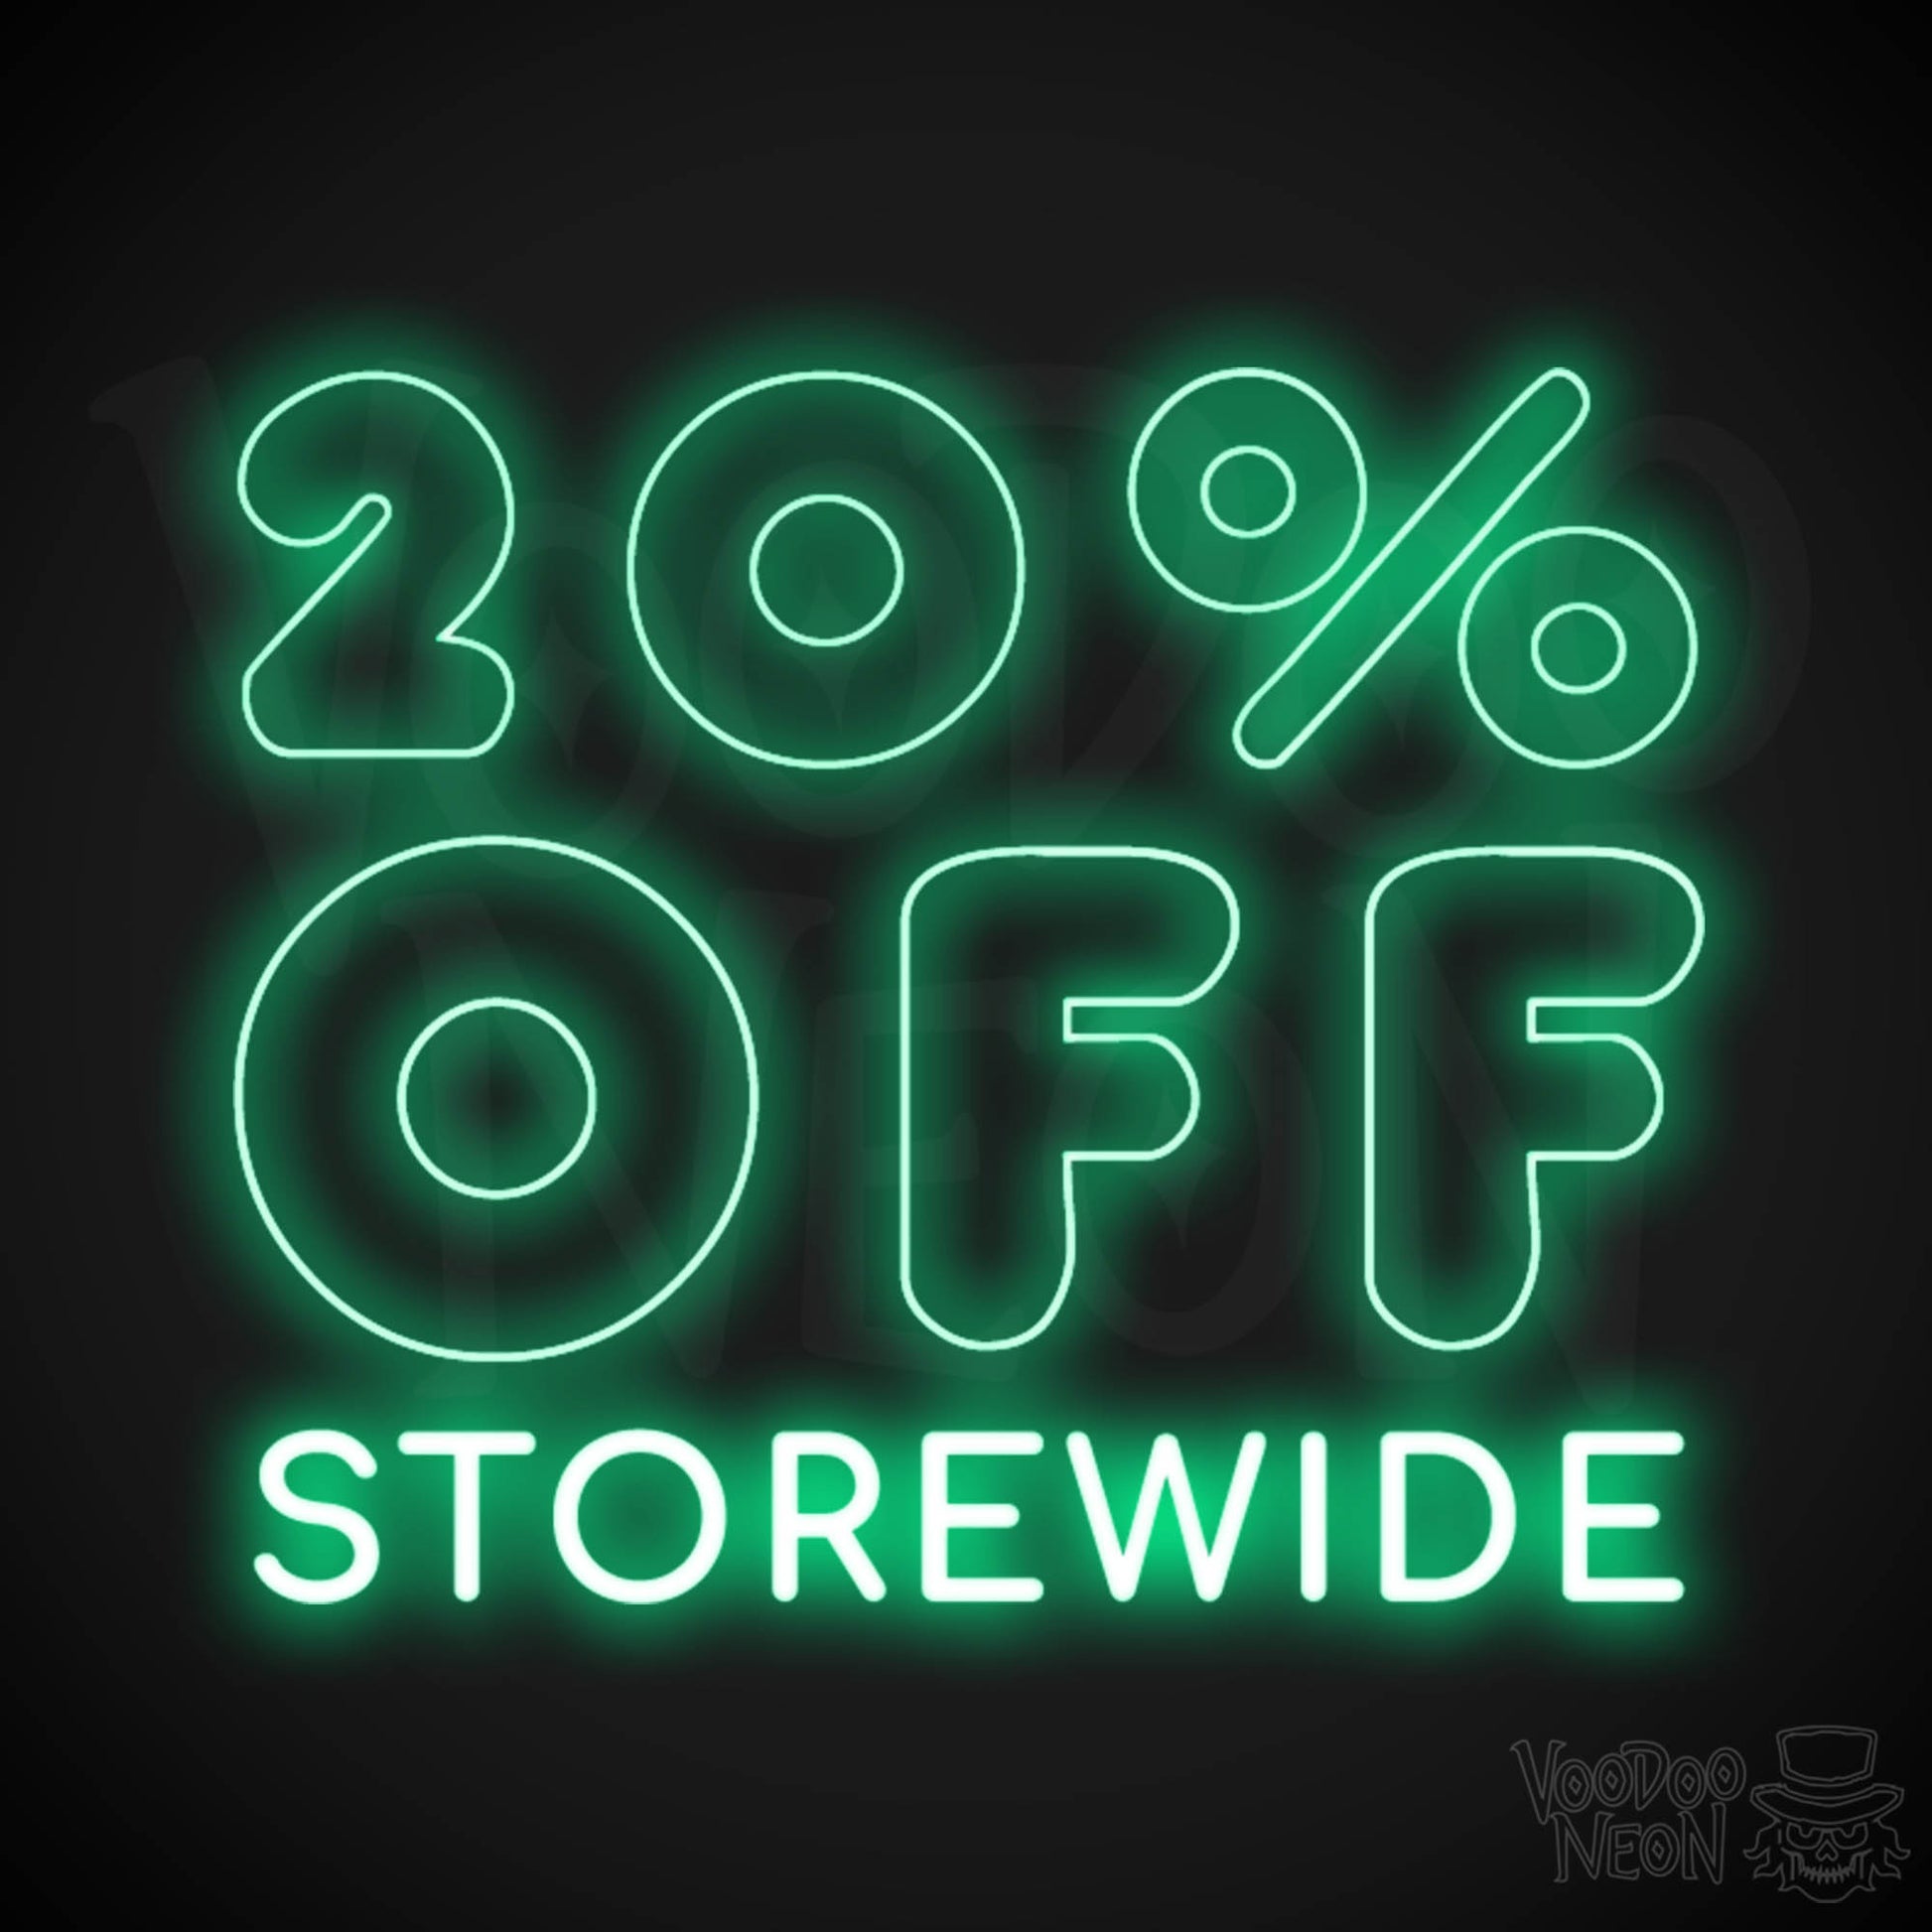 20% Off Storewide Neon Sign - 20% Off Storewide Sign - LED Shop Sign - Color Green